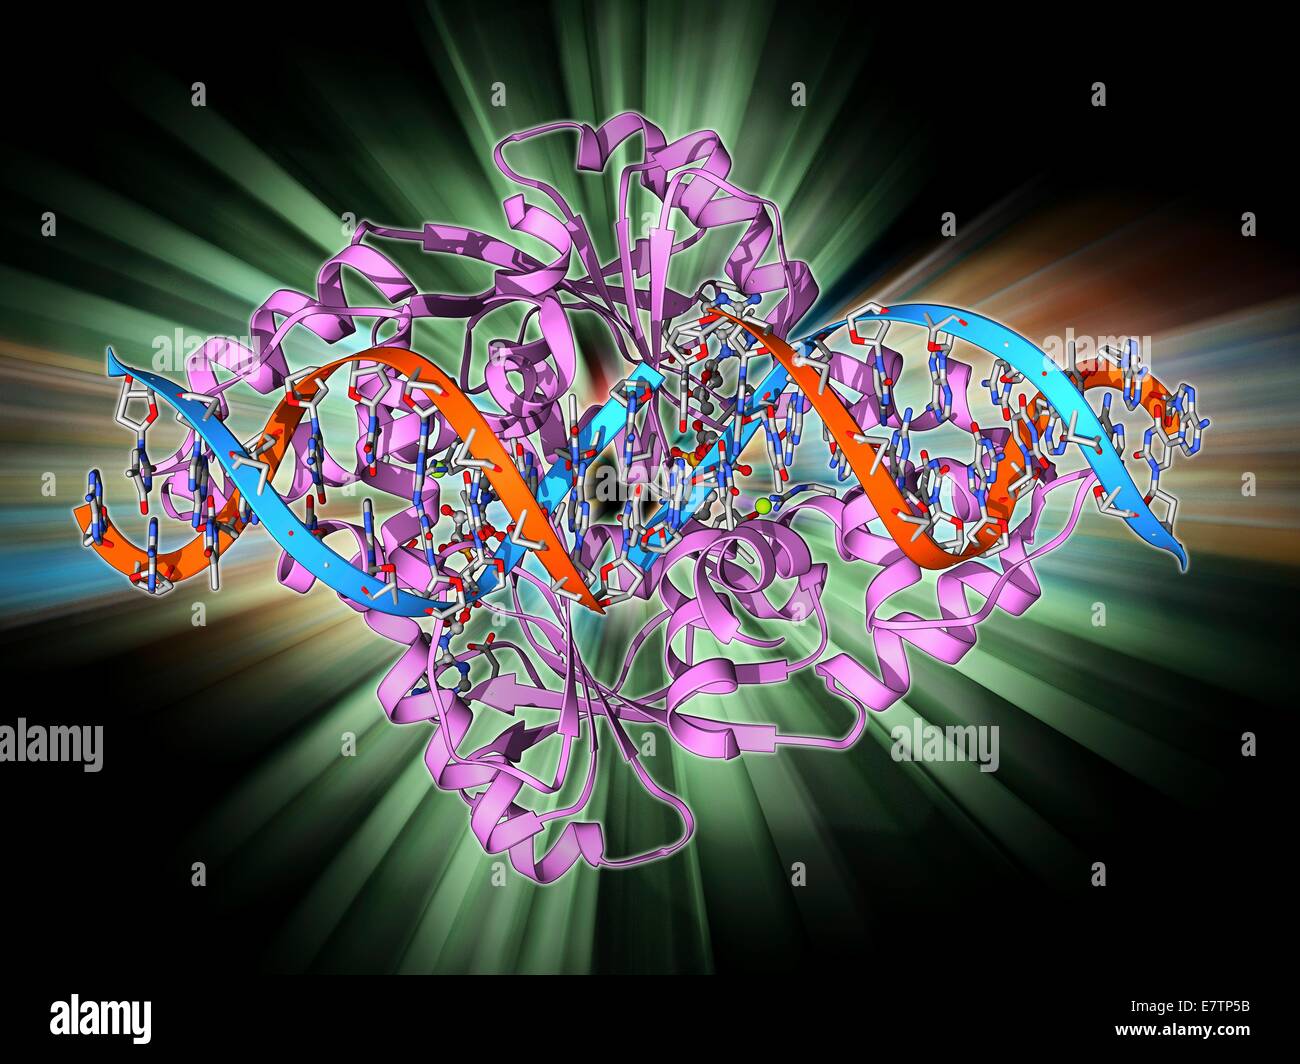 Transcription repressor protein and DNA, molecular model. The repressor protein (green) is binding to a strand of DNA (deoxyribonucleic acid, pink and purple). It acts by physically blocking access to the DNA, preventing the transcription of the genetic i Stock Photo